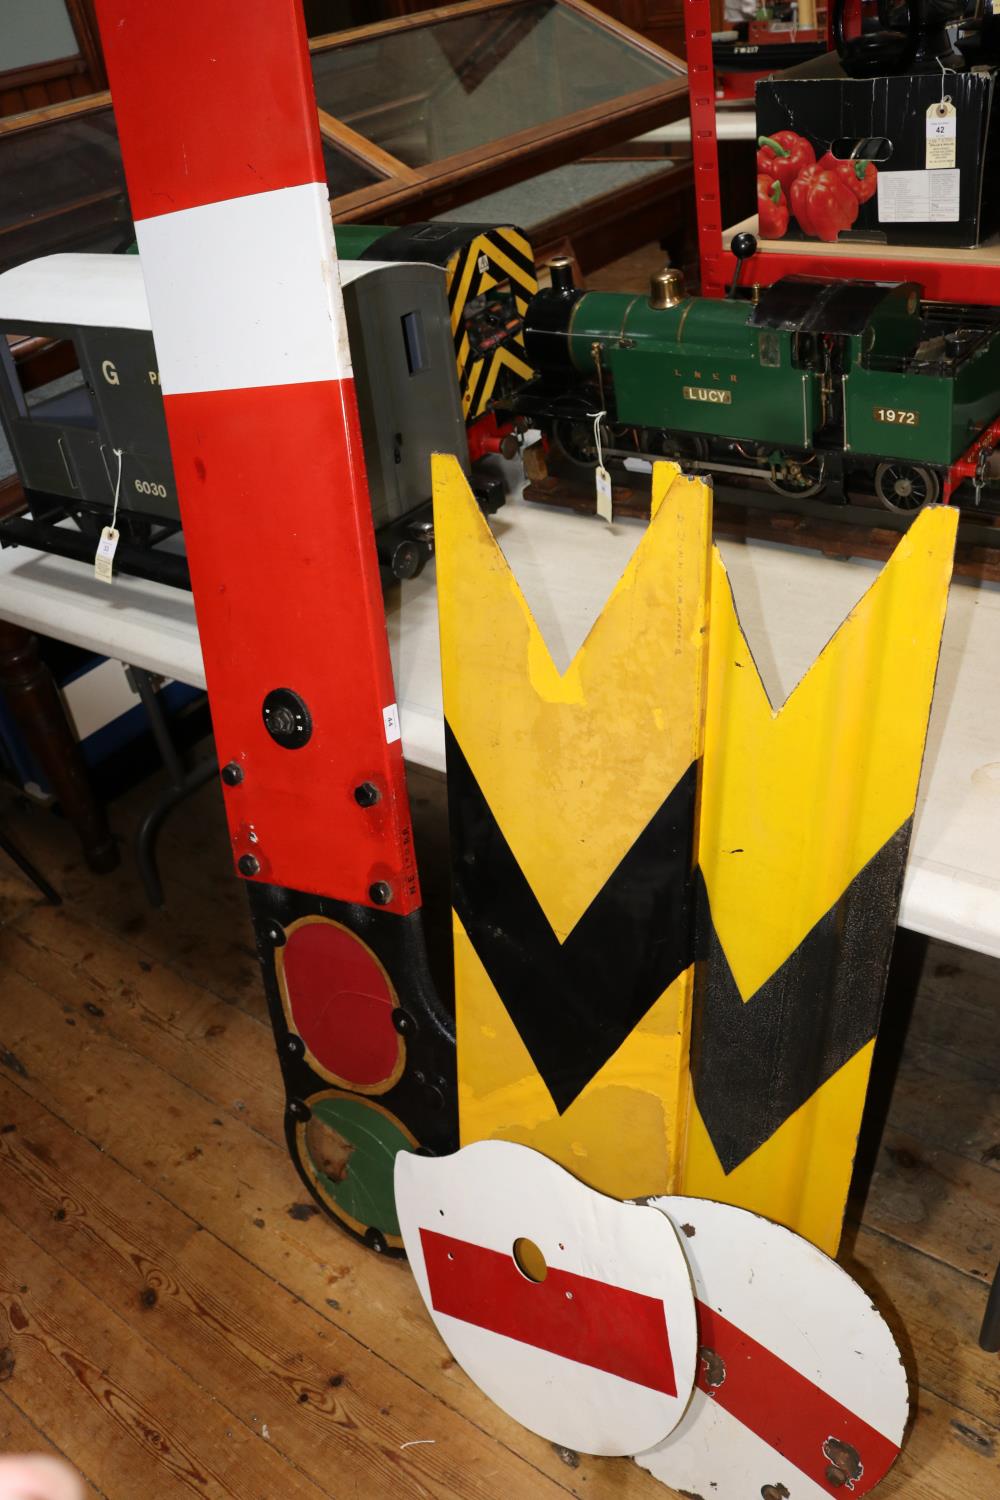 5x Railway signals. 3x semaphore signals; a Home Signal arm with cast iron spectacle plate